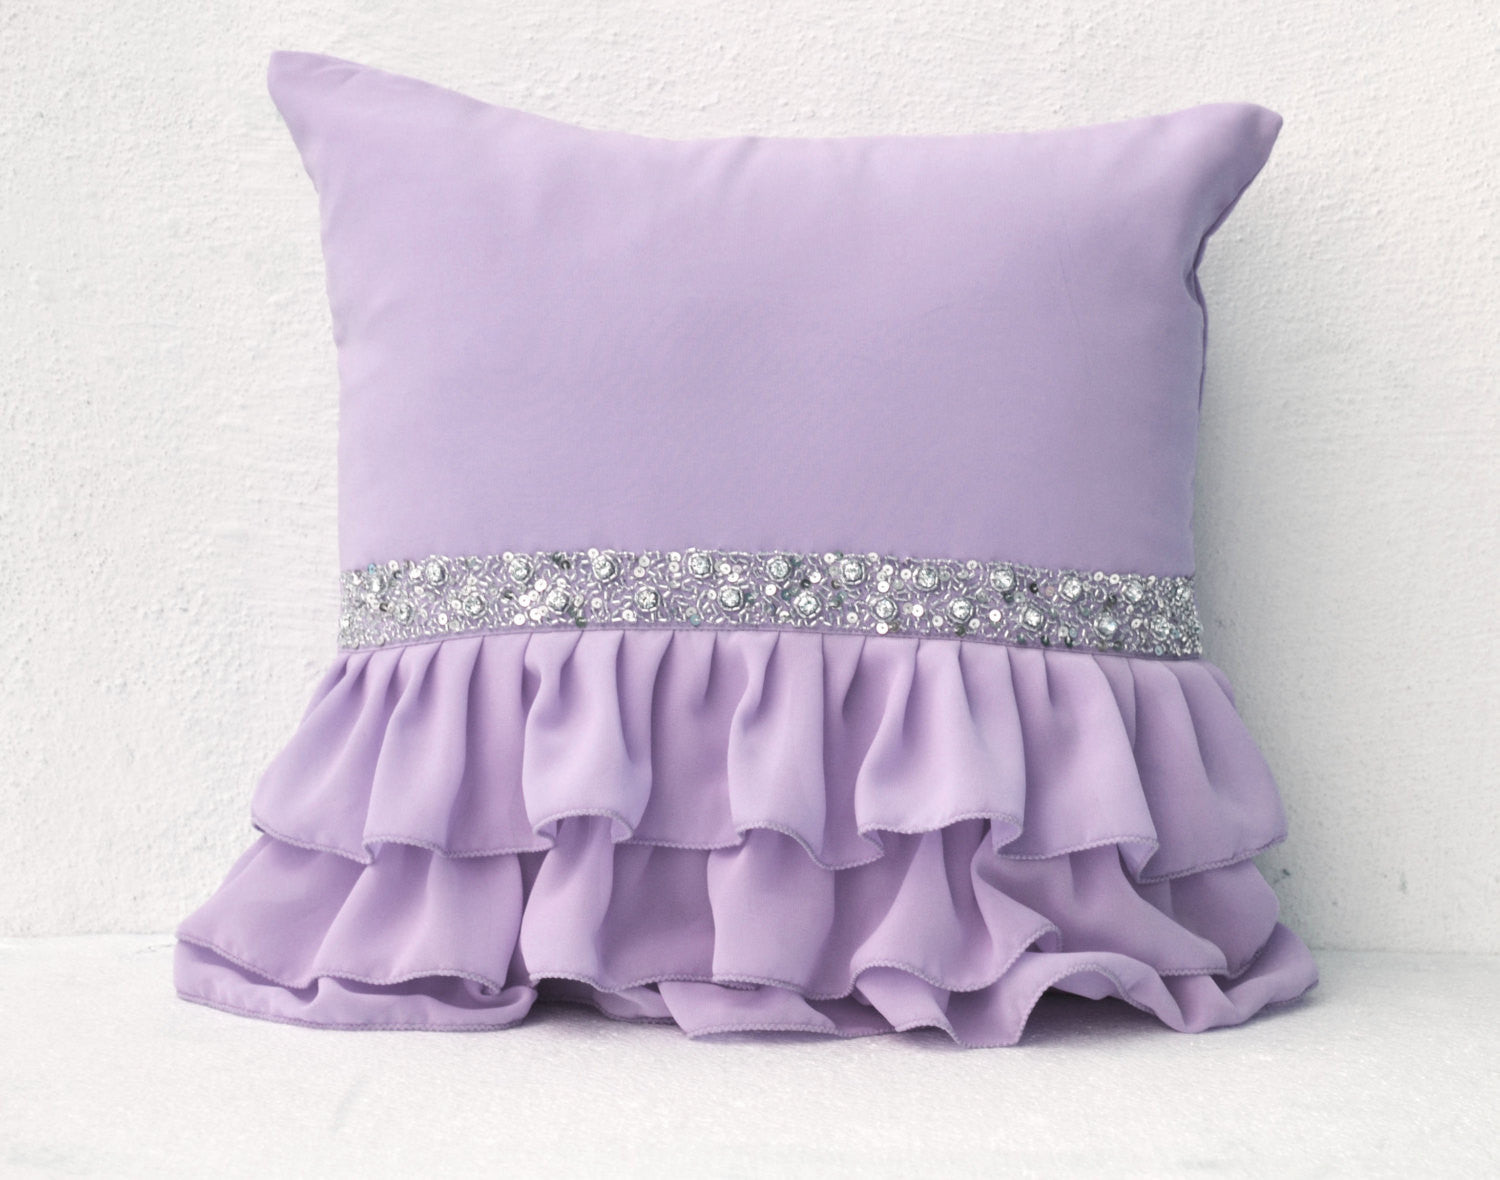  Handmade lilac throw pillow with ruffles and sequin